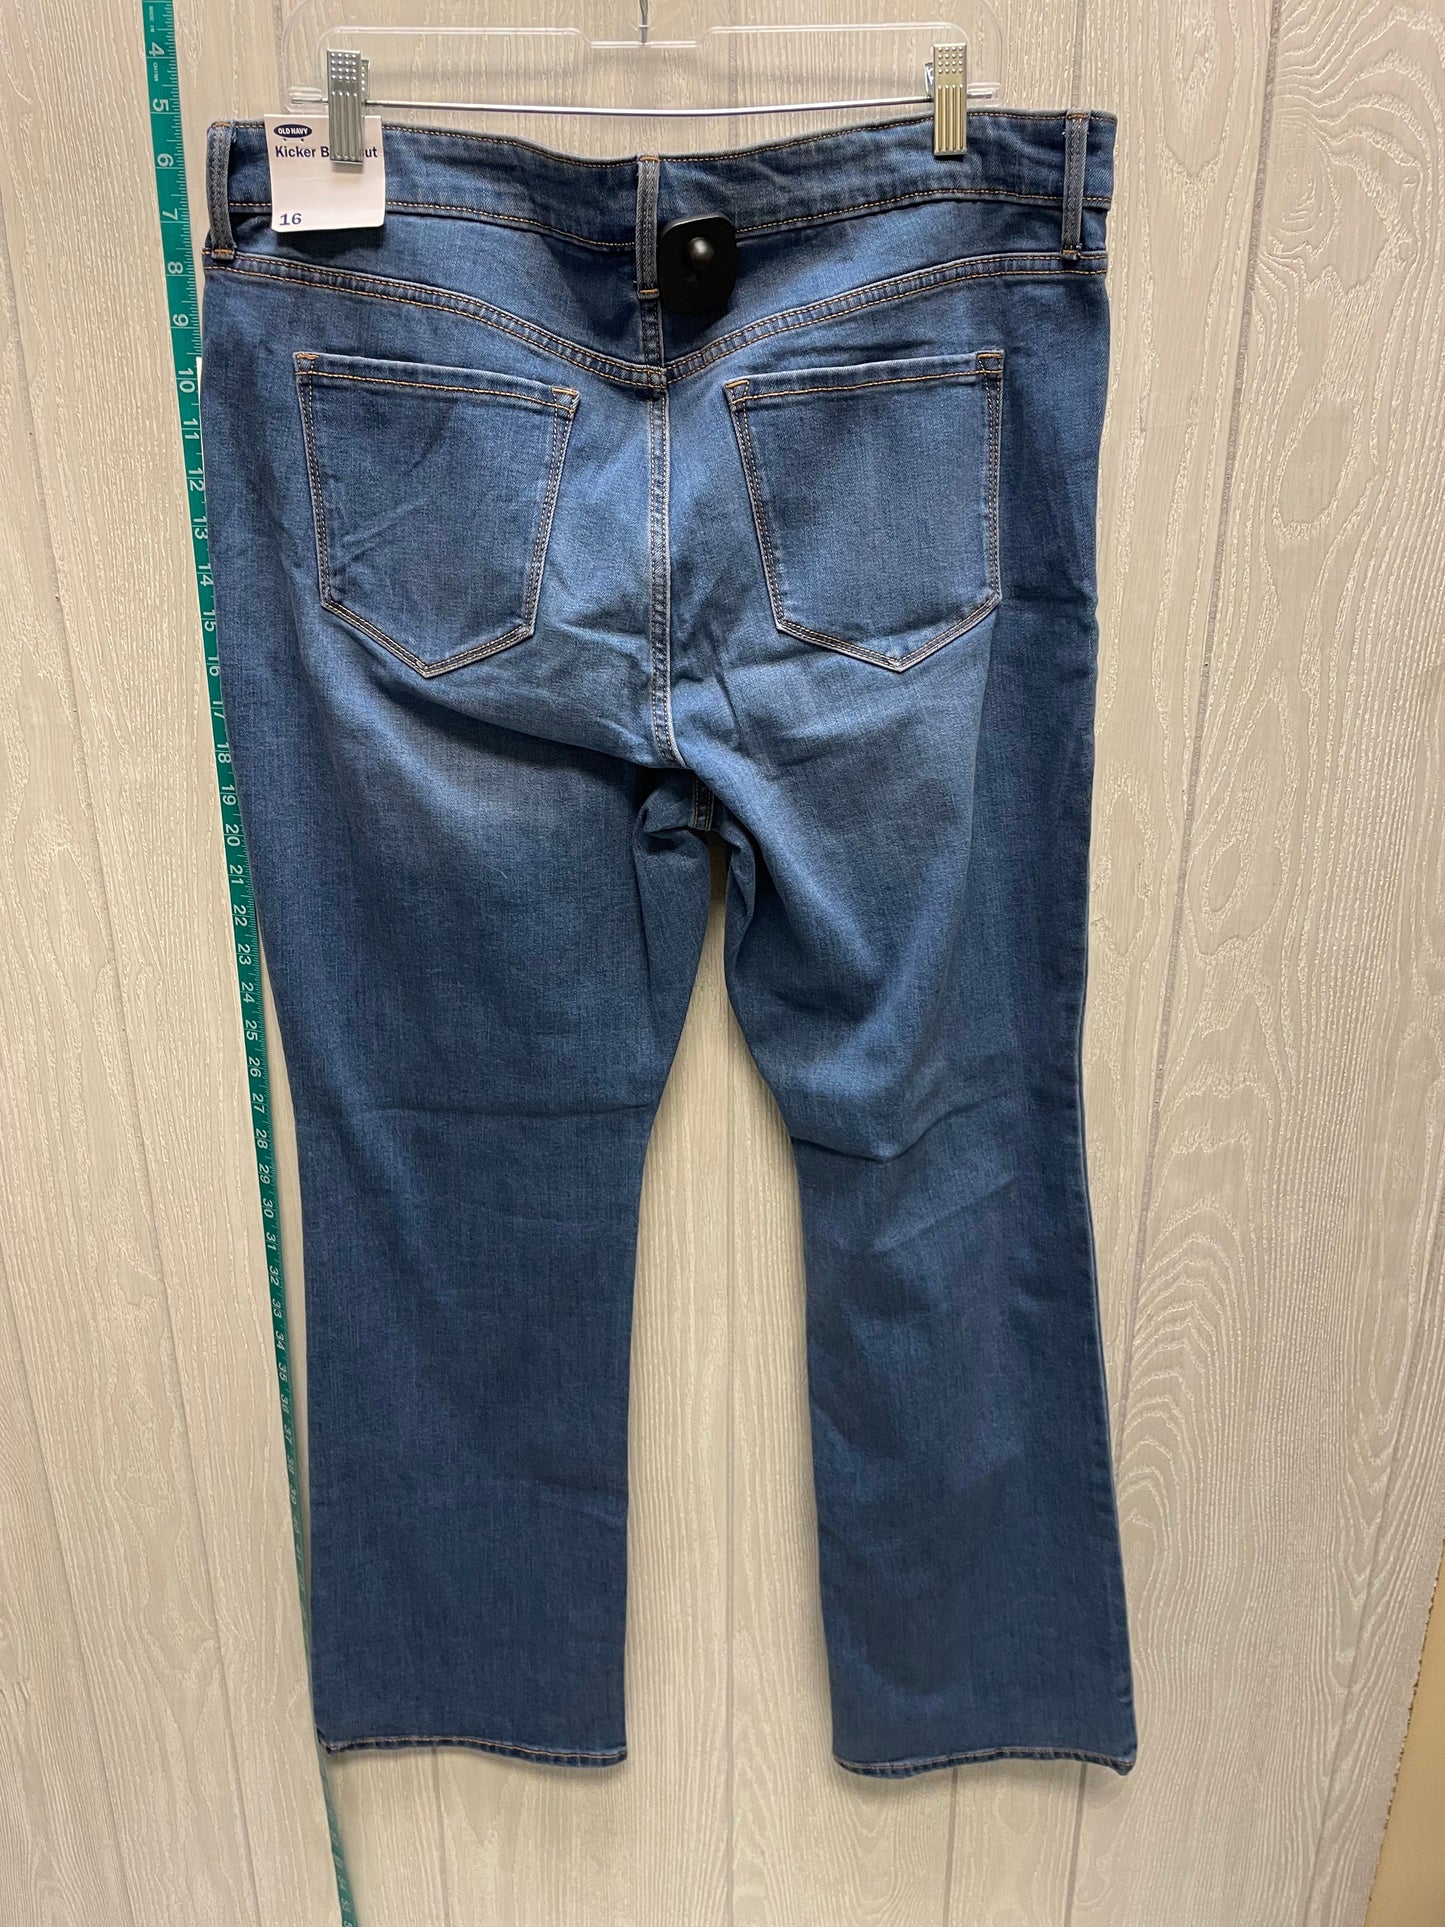 Blue Denim Jeans Boot Cut Old Navy, Size 16